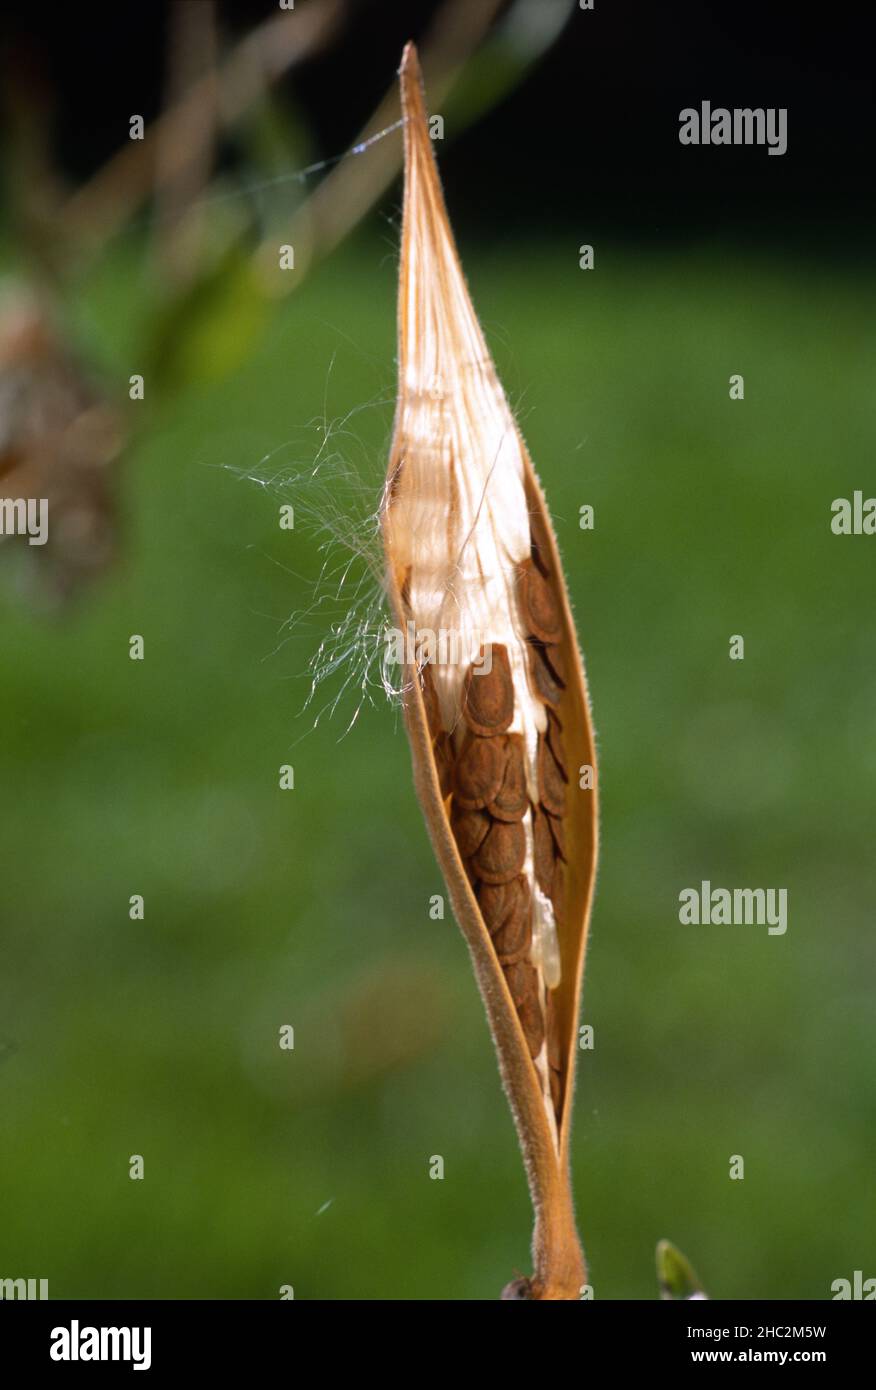 A milkweed seed pod opens to reveal the seeds attached to silky filaments inside ready to be taken away in the breeze. Stock Photo